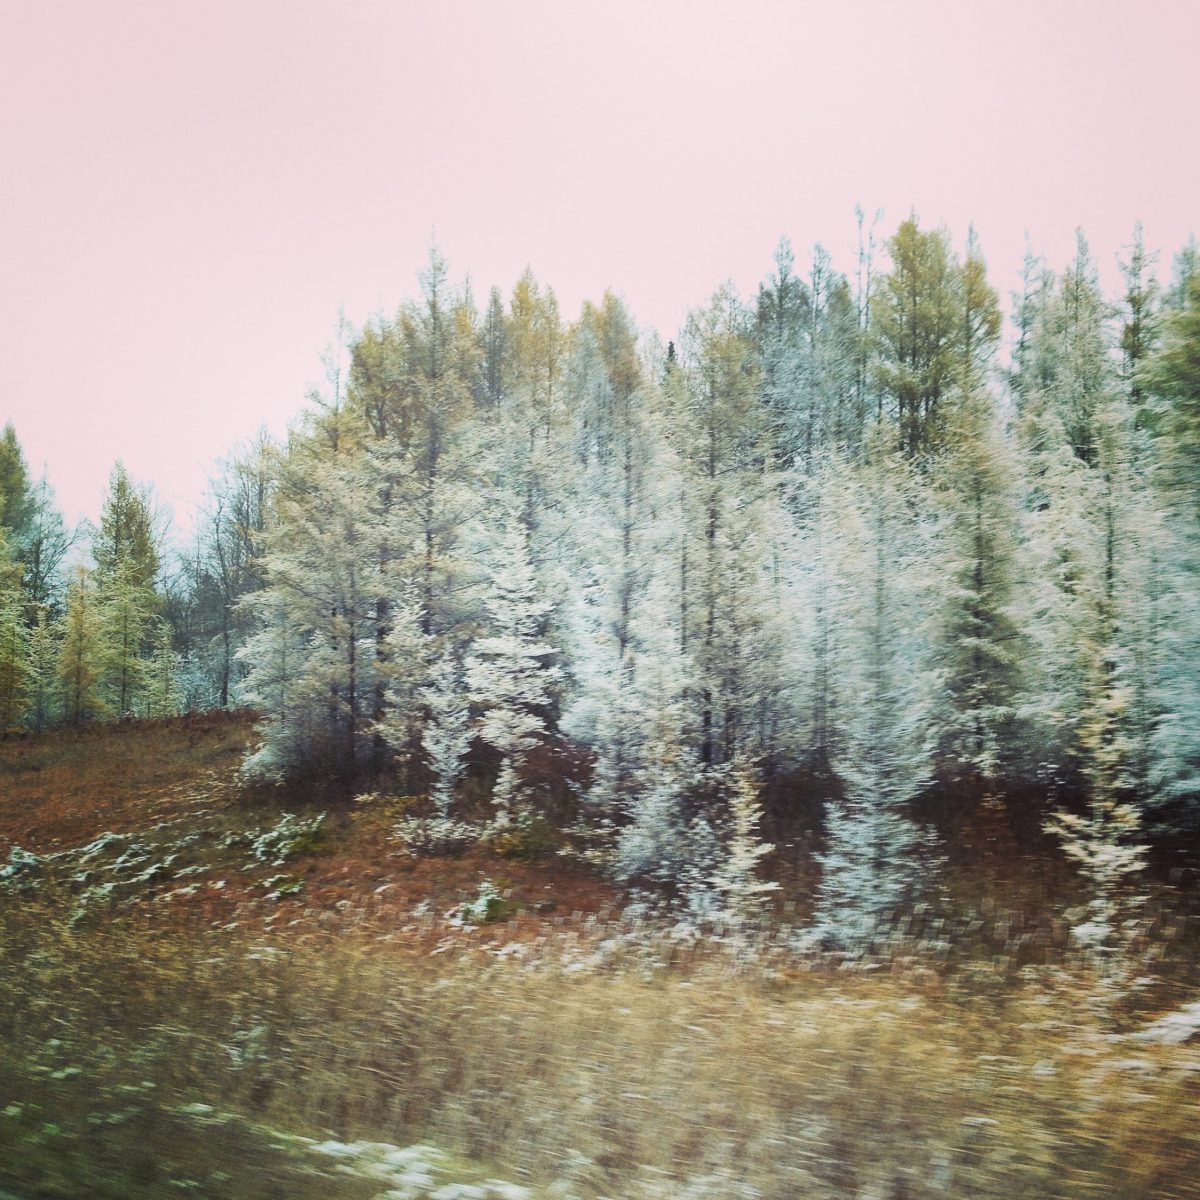 Frost on Pines Along I75 by Angela Josephine for 75, a poem about travelling through seasons